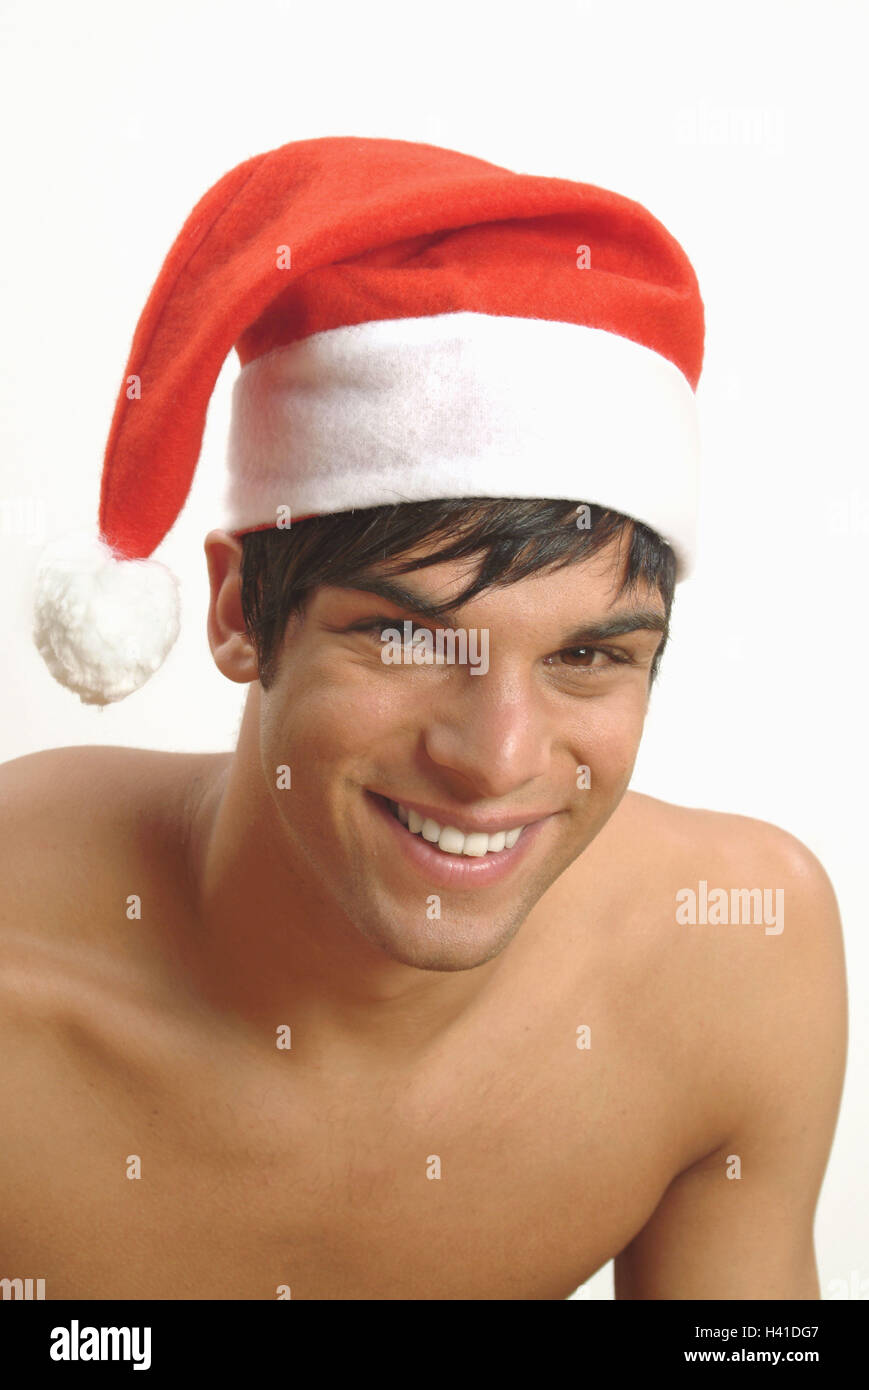 Man, young, smile, free upper part of the body, Santa's hat, portrait, man's portrait, 20-30 years, dark-haired, happy, cheerfulness, person, Christmas, Christmas, yule tide, for Christmas, Christmas, xmas, x-mas, feast, feasts, holidays, funnily, positiv Stock Photo